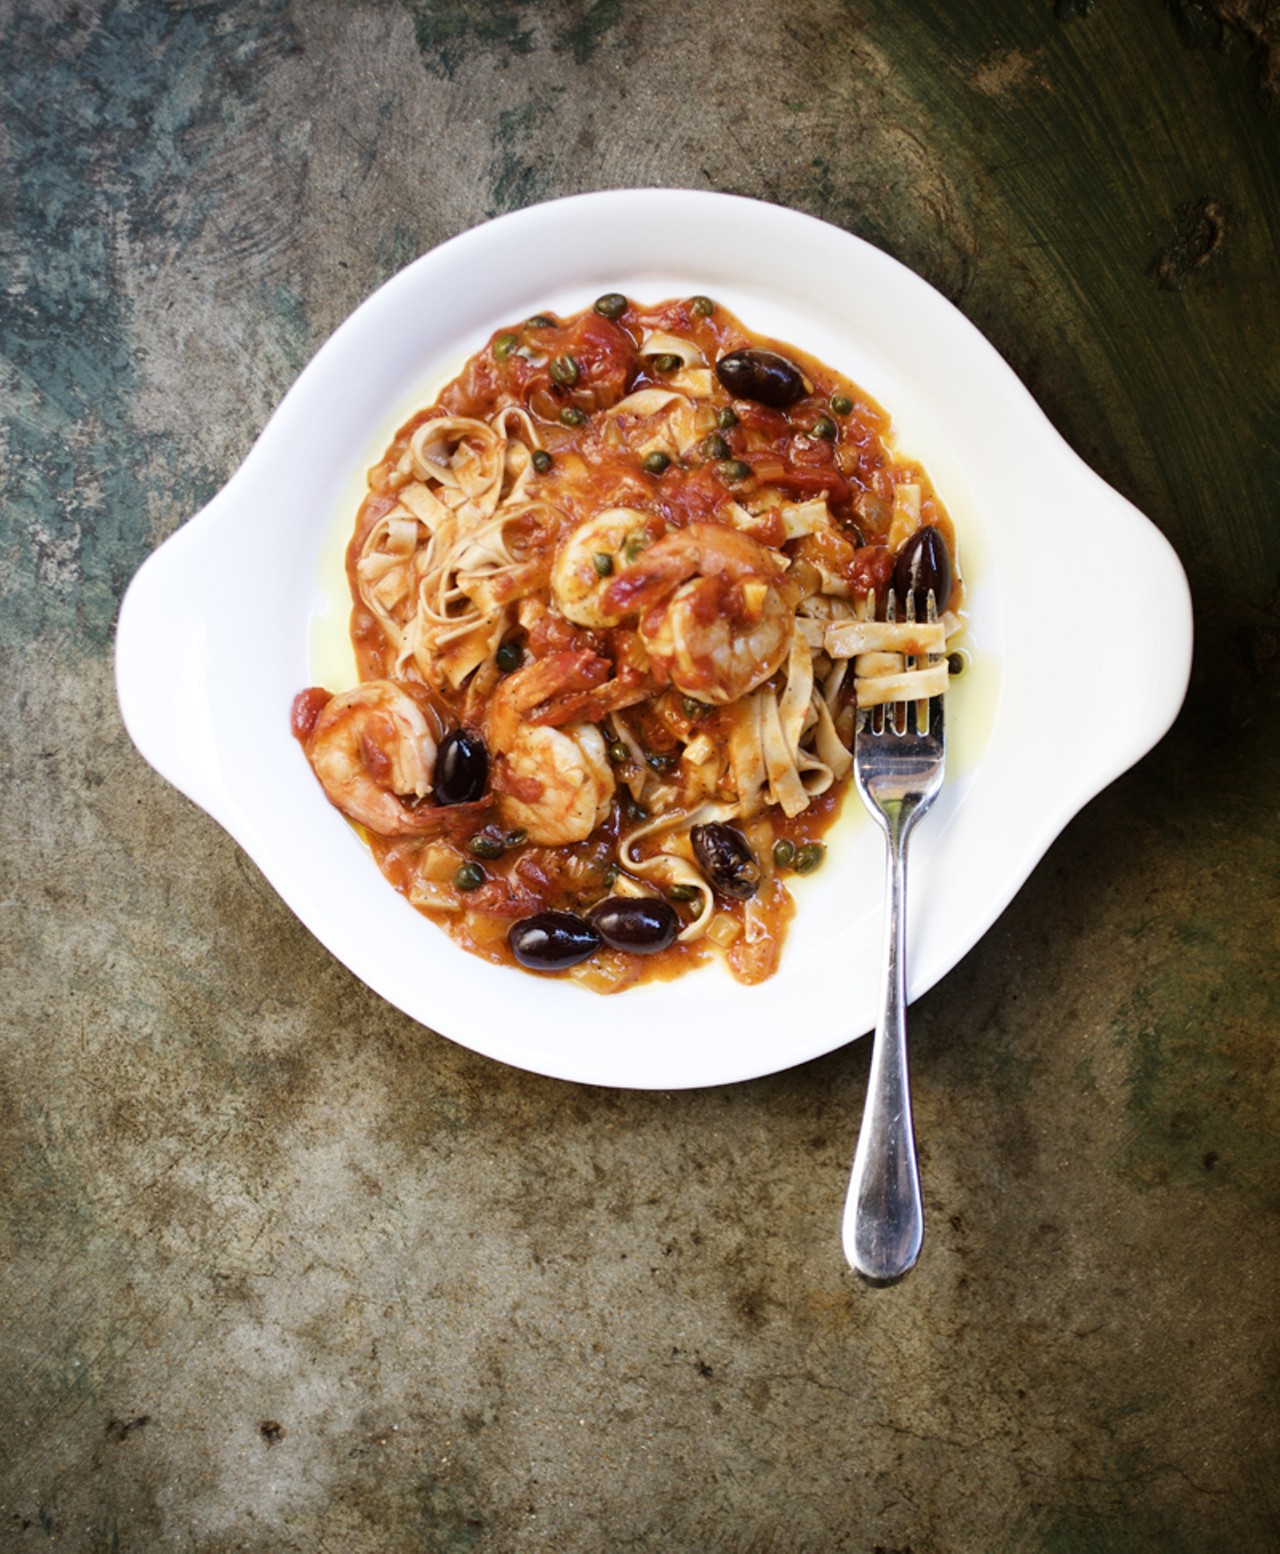 Fettuccine-Gulf Shrimp is served with fresh pasta, olives, capers, basil, chiles and tomato.